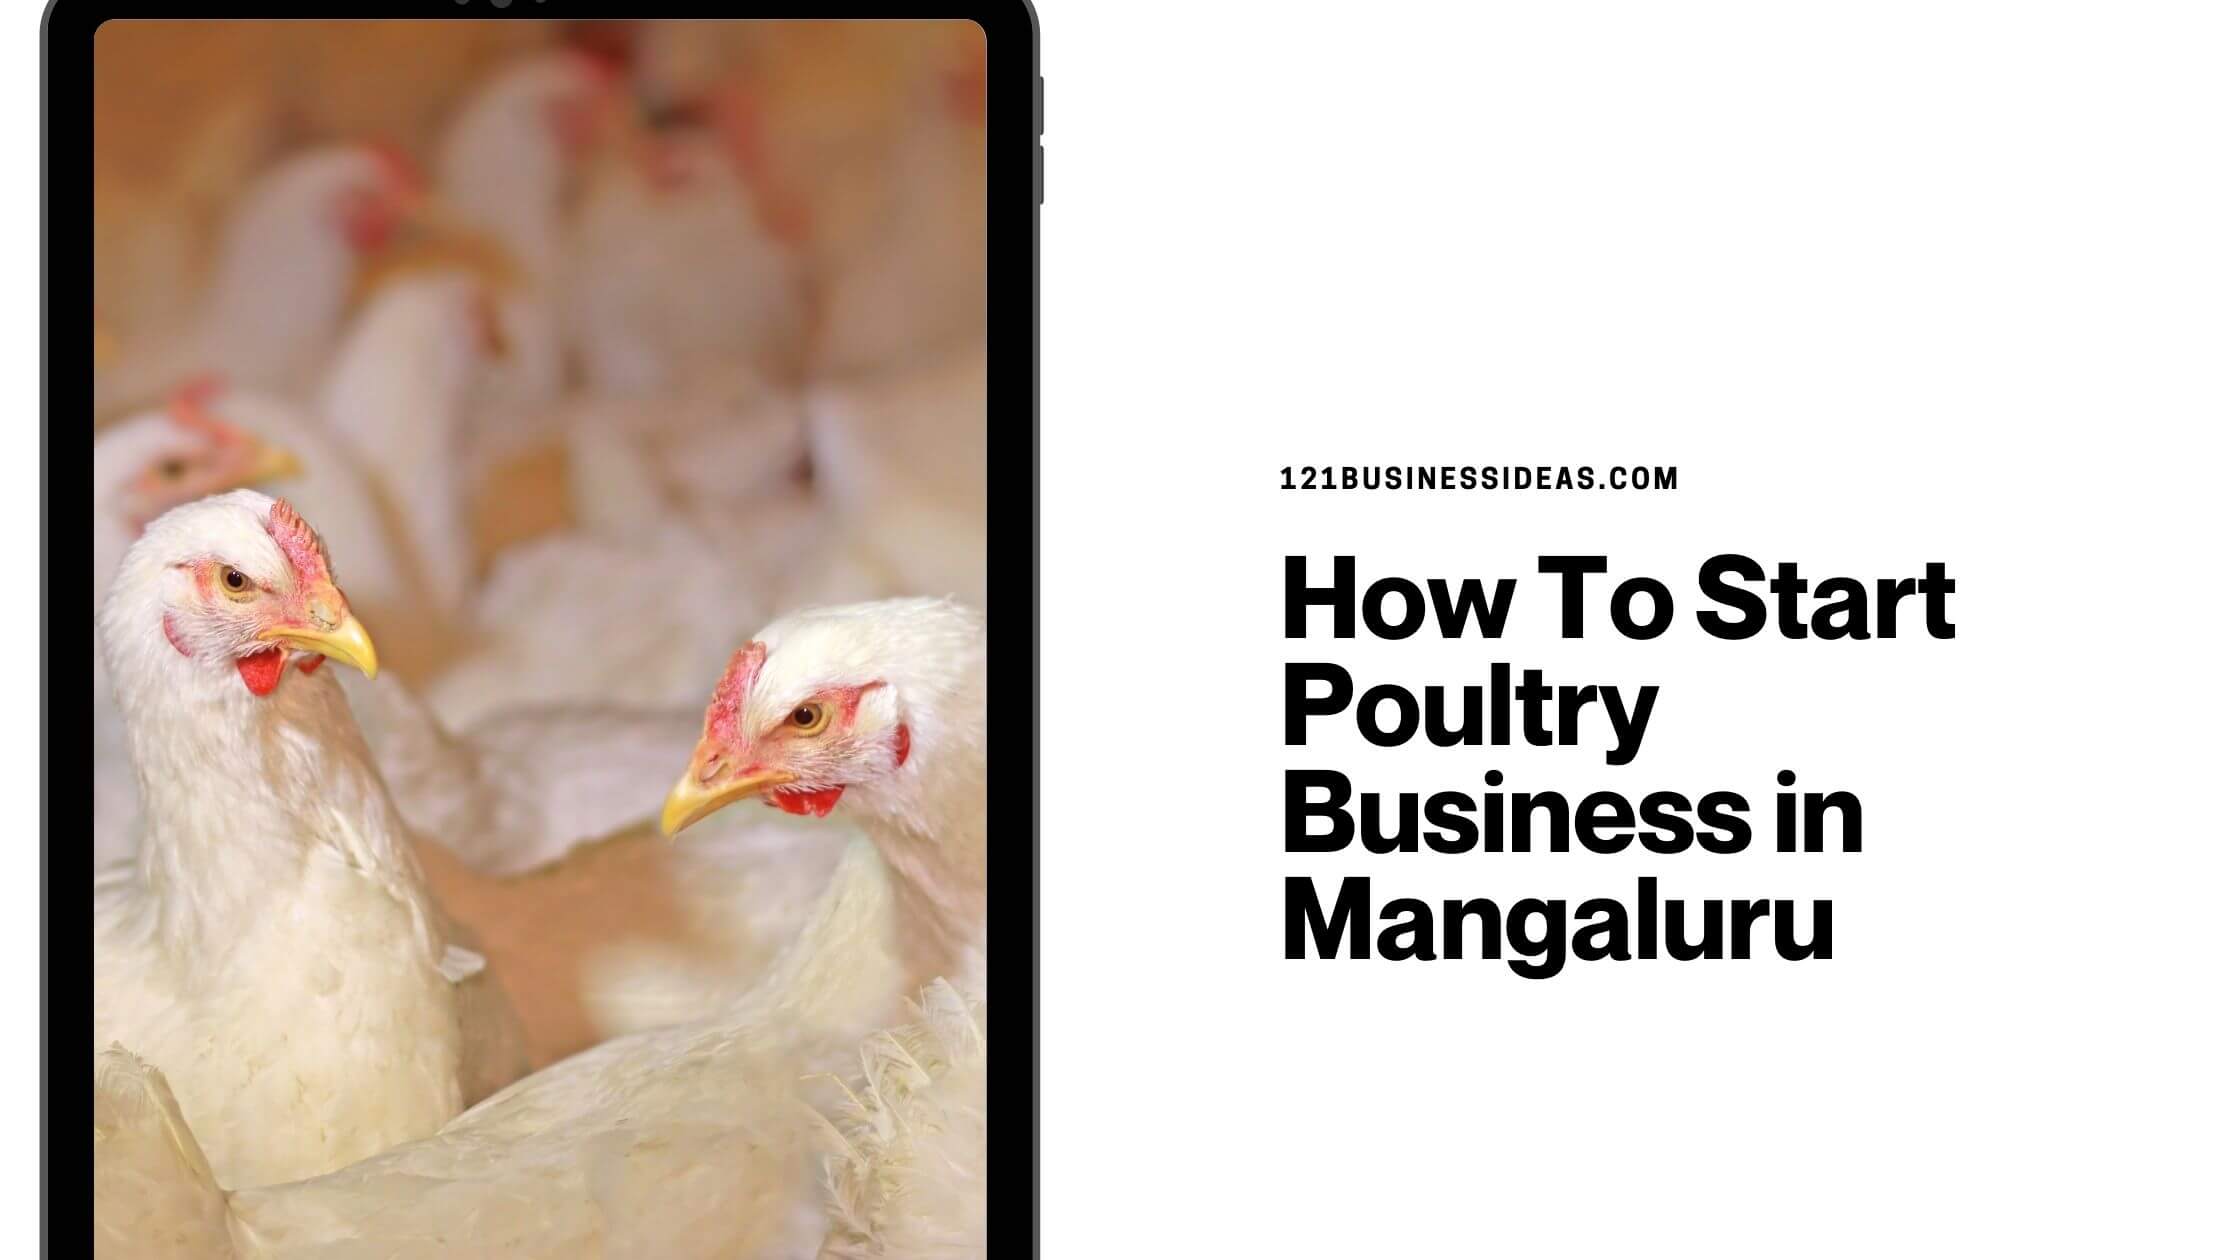 _How To Start Poultry Business in Mangaluru (1)